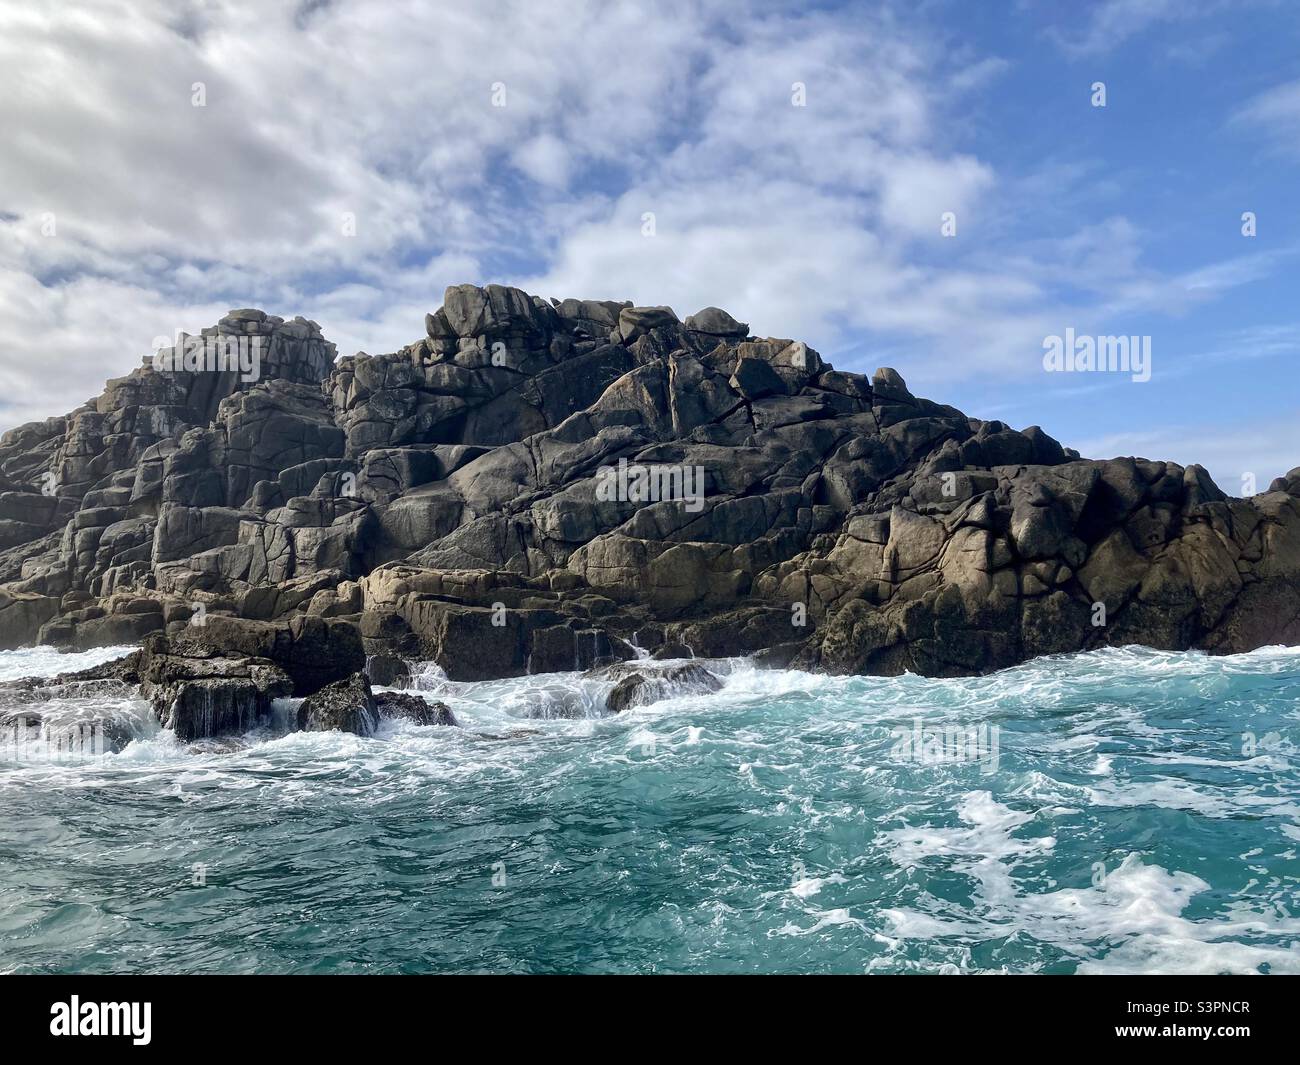 A wild sea washing against a rocky island, Isles of Scilly Stock Photo